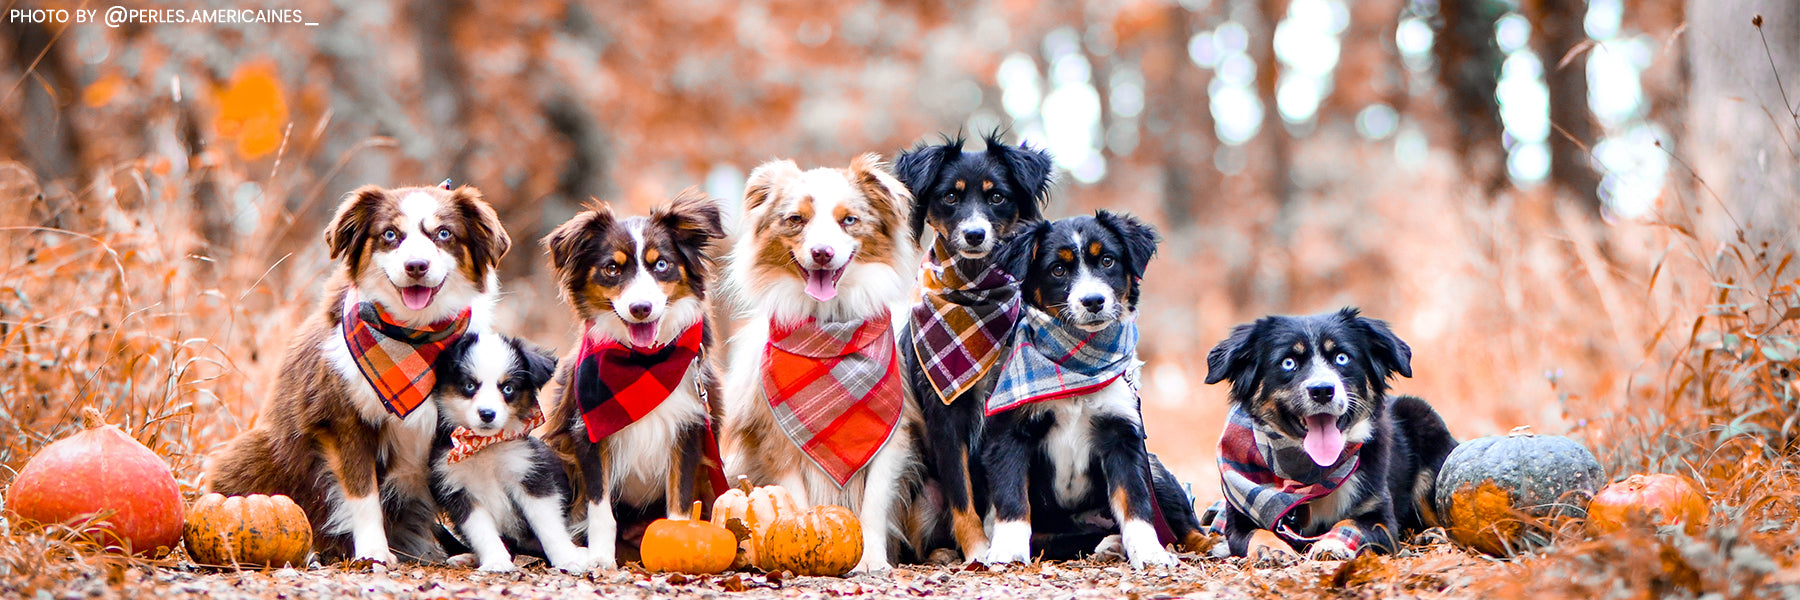 7 Toy Australian Shepherd dogs are sitting next to each other staring at the camera. They are from Perles Americaines in France (@perles.americaines_) Bergers australiens toys. They are all wearing flannel fall dog bandanas.